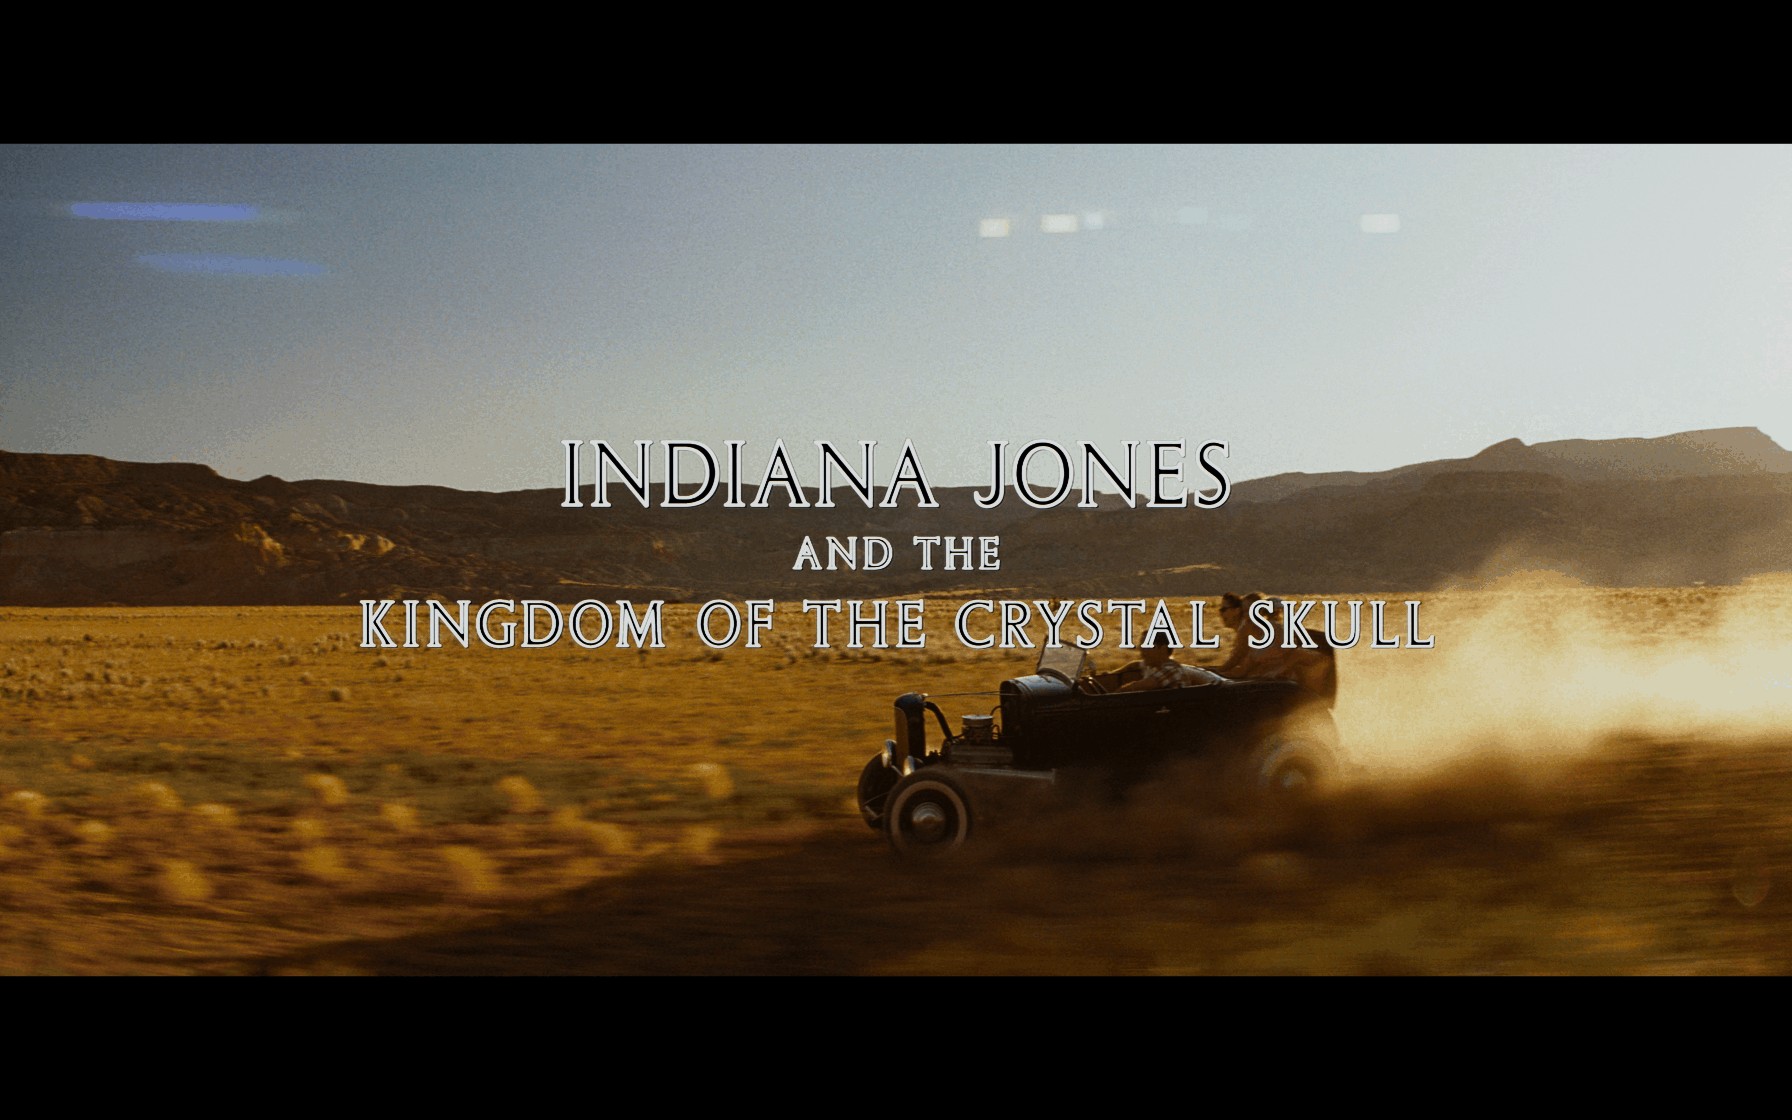 Indiana Jones and the Kingdom of the Crystal Skull 4K title